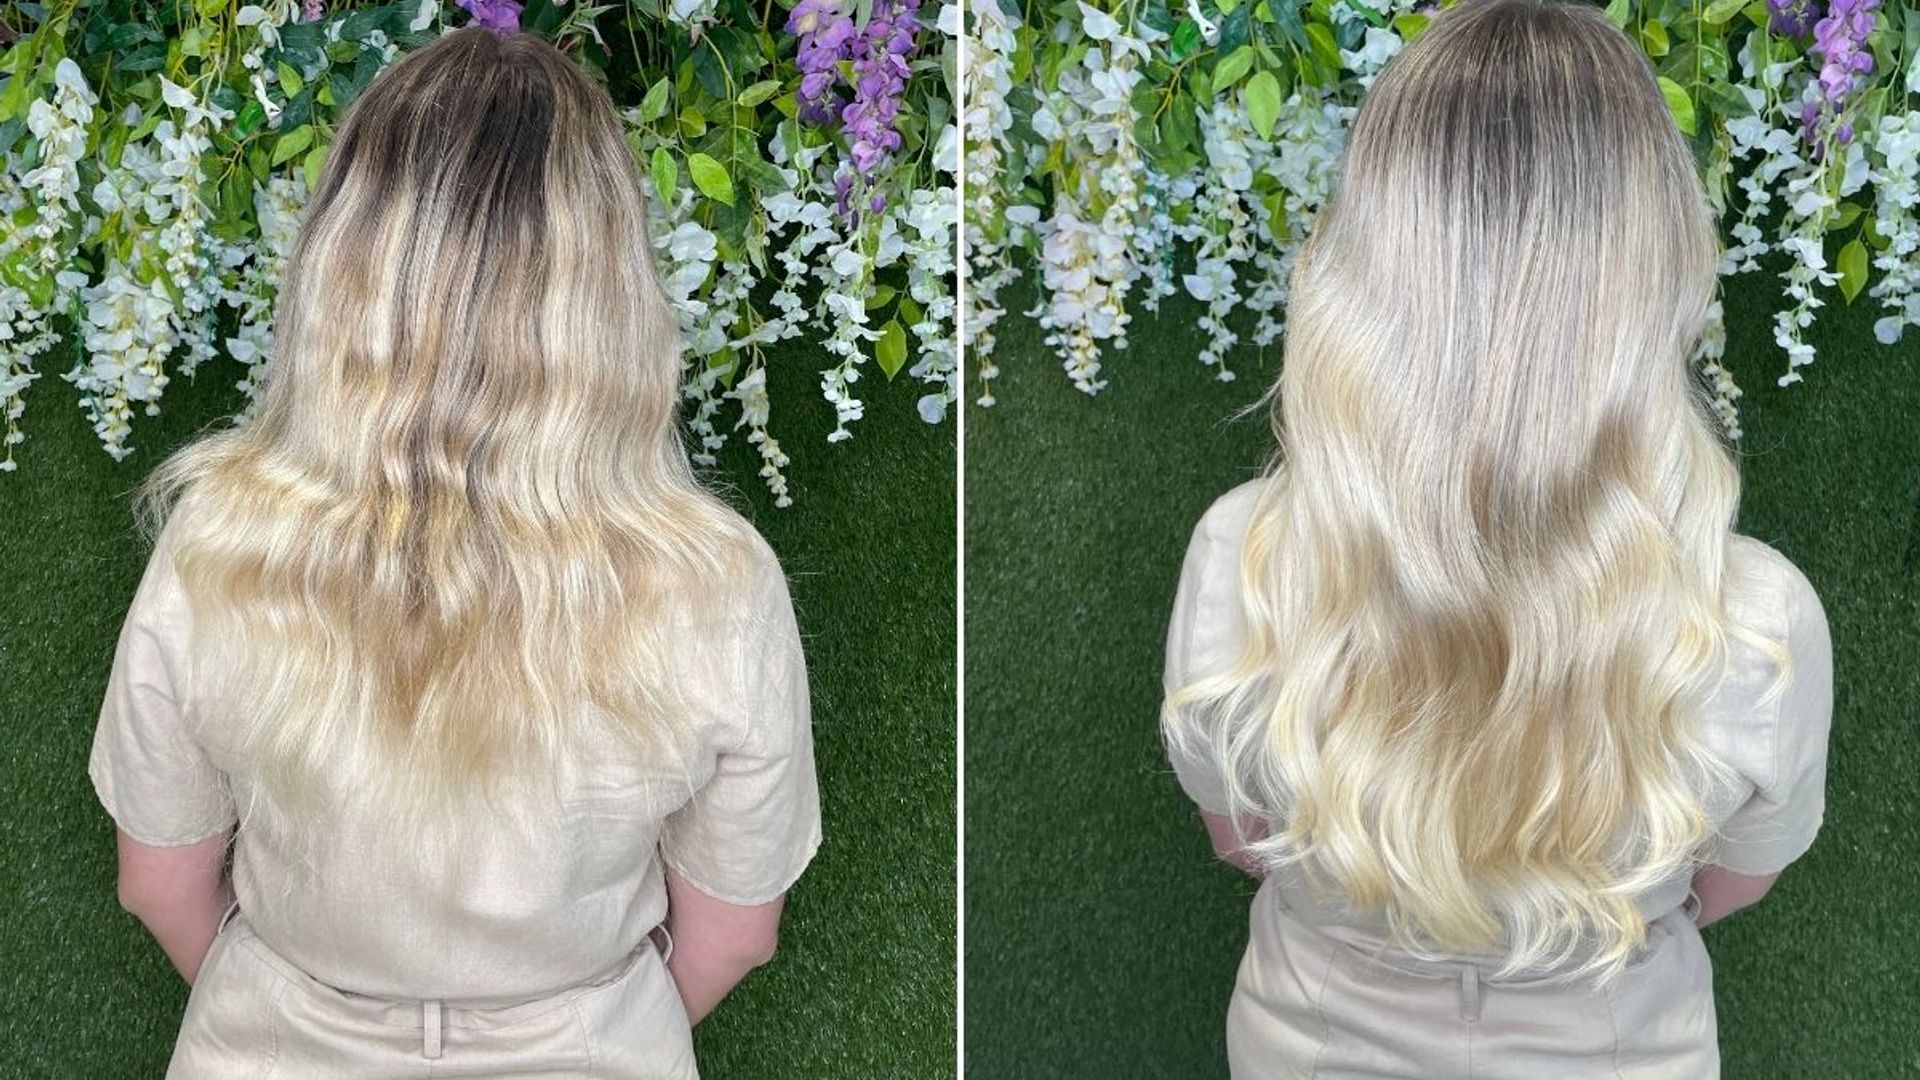 I tried ultra bond hair extensions to transform my ultra-fine hair - and I'll never go back